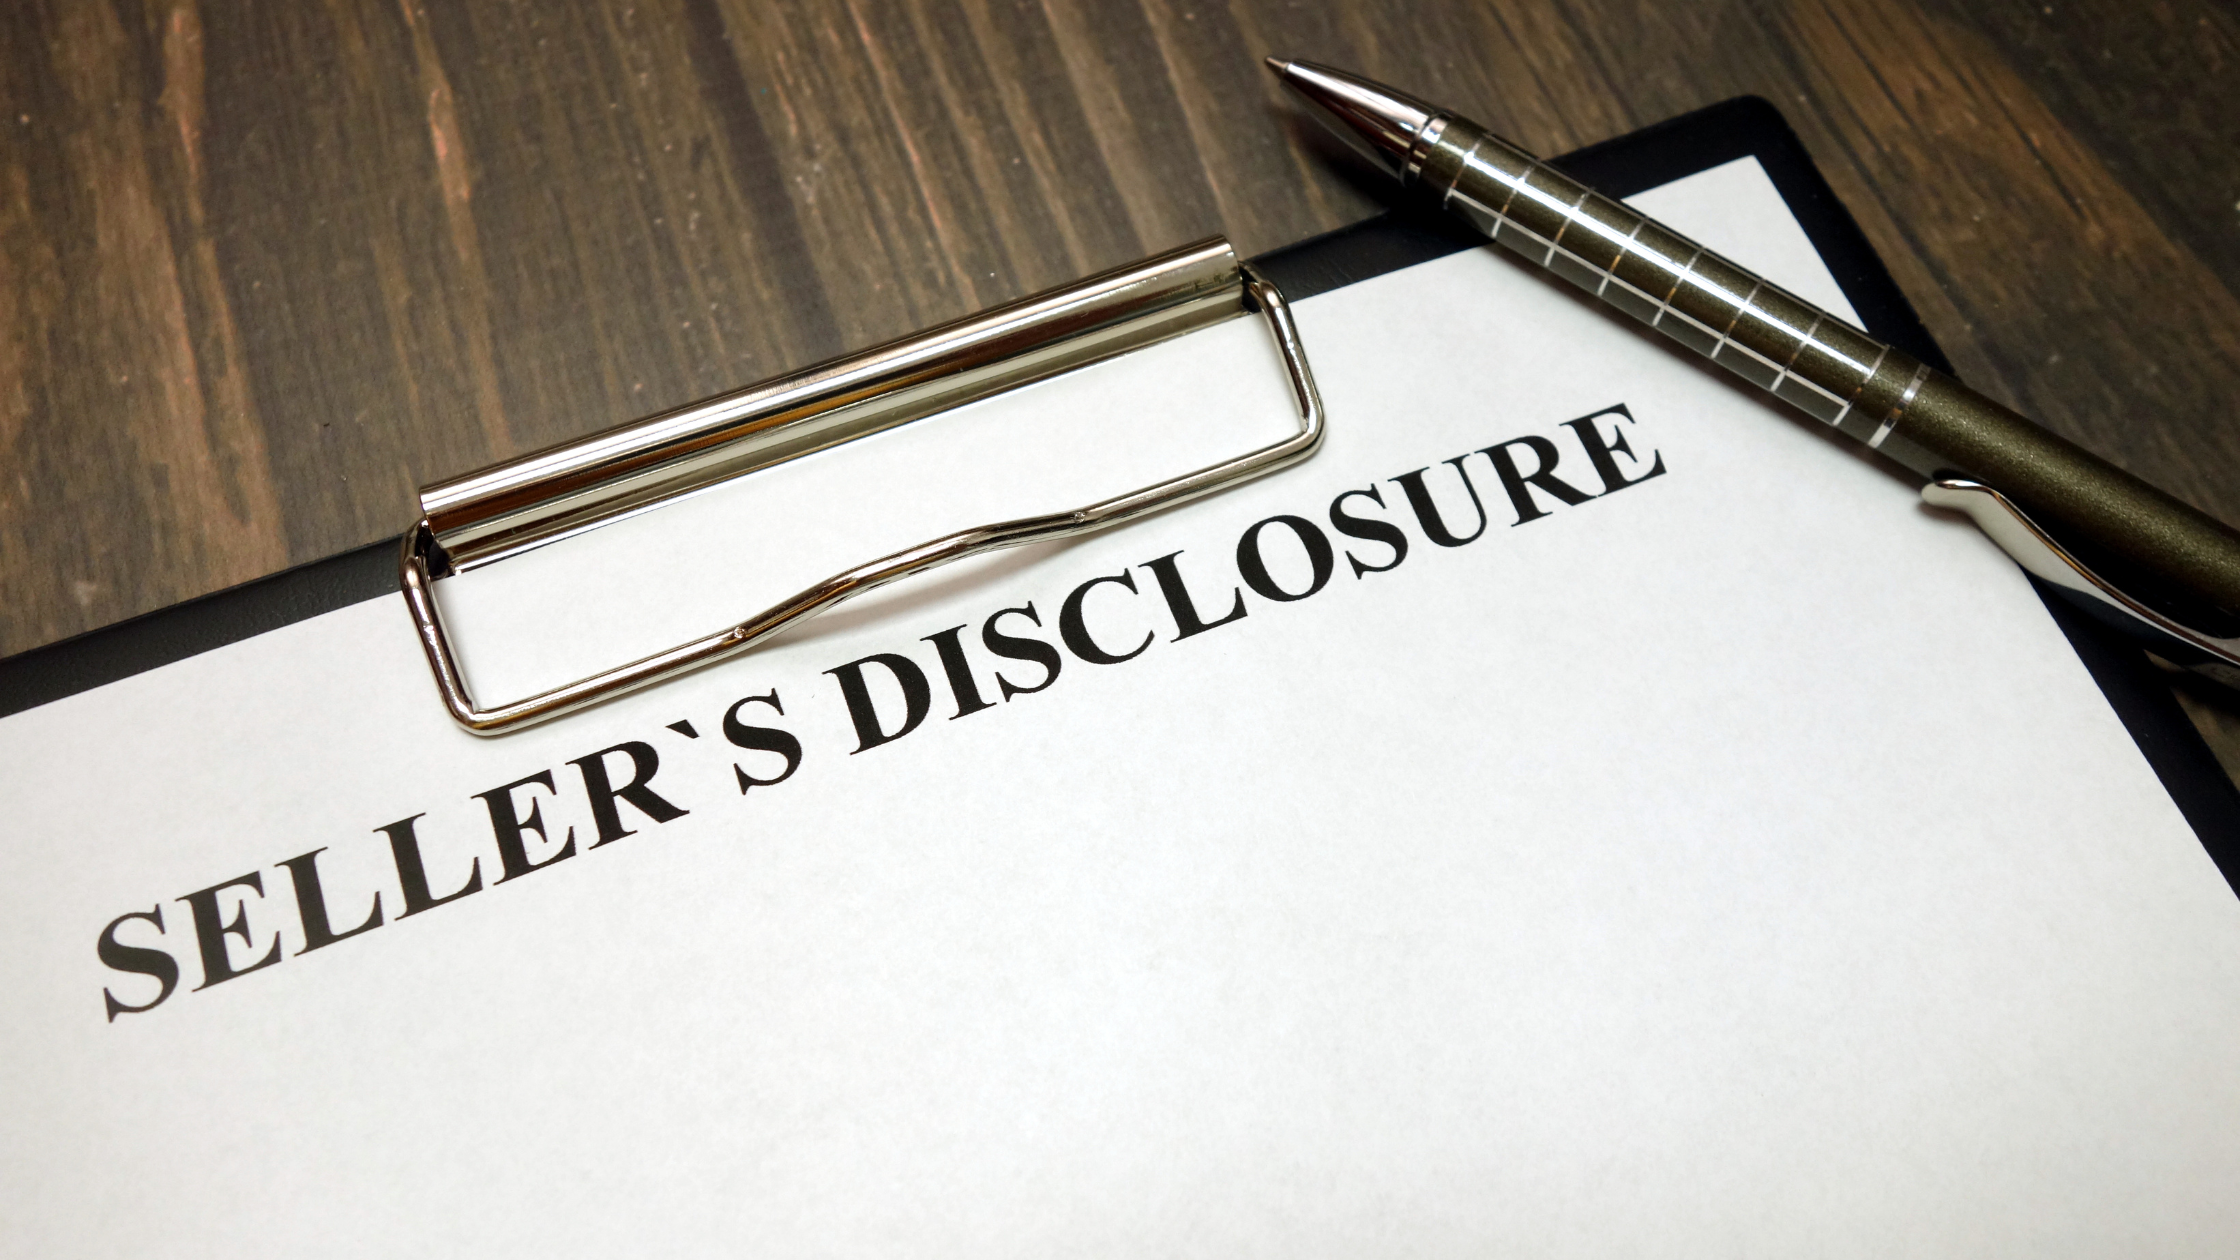 How to Properly Disclose Information when selling your Tampa business